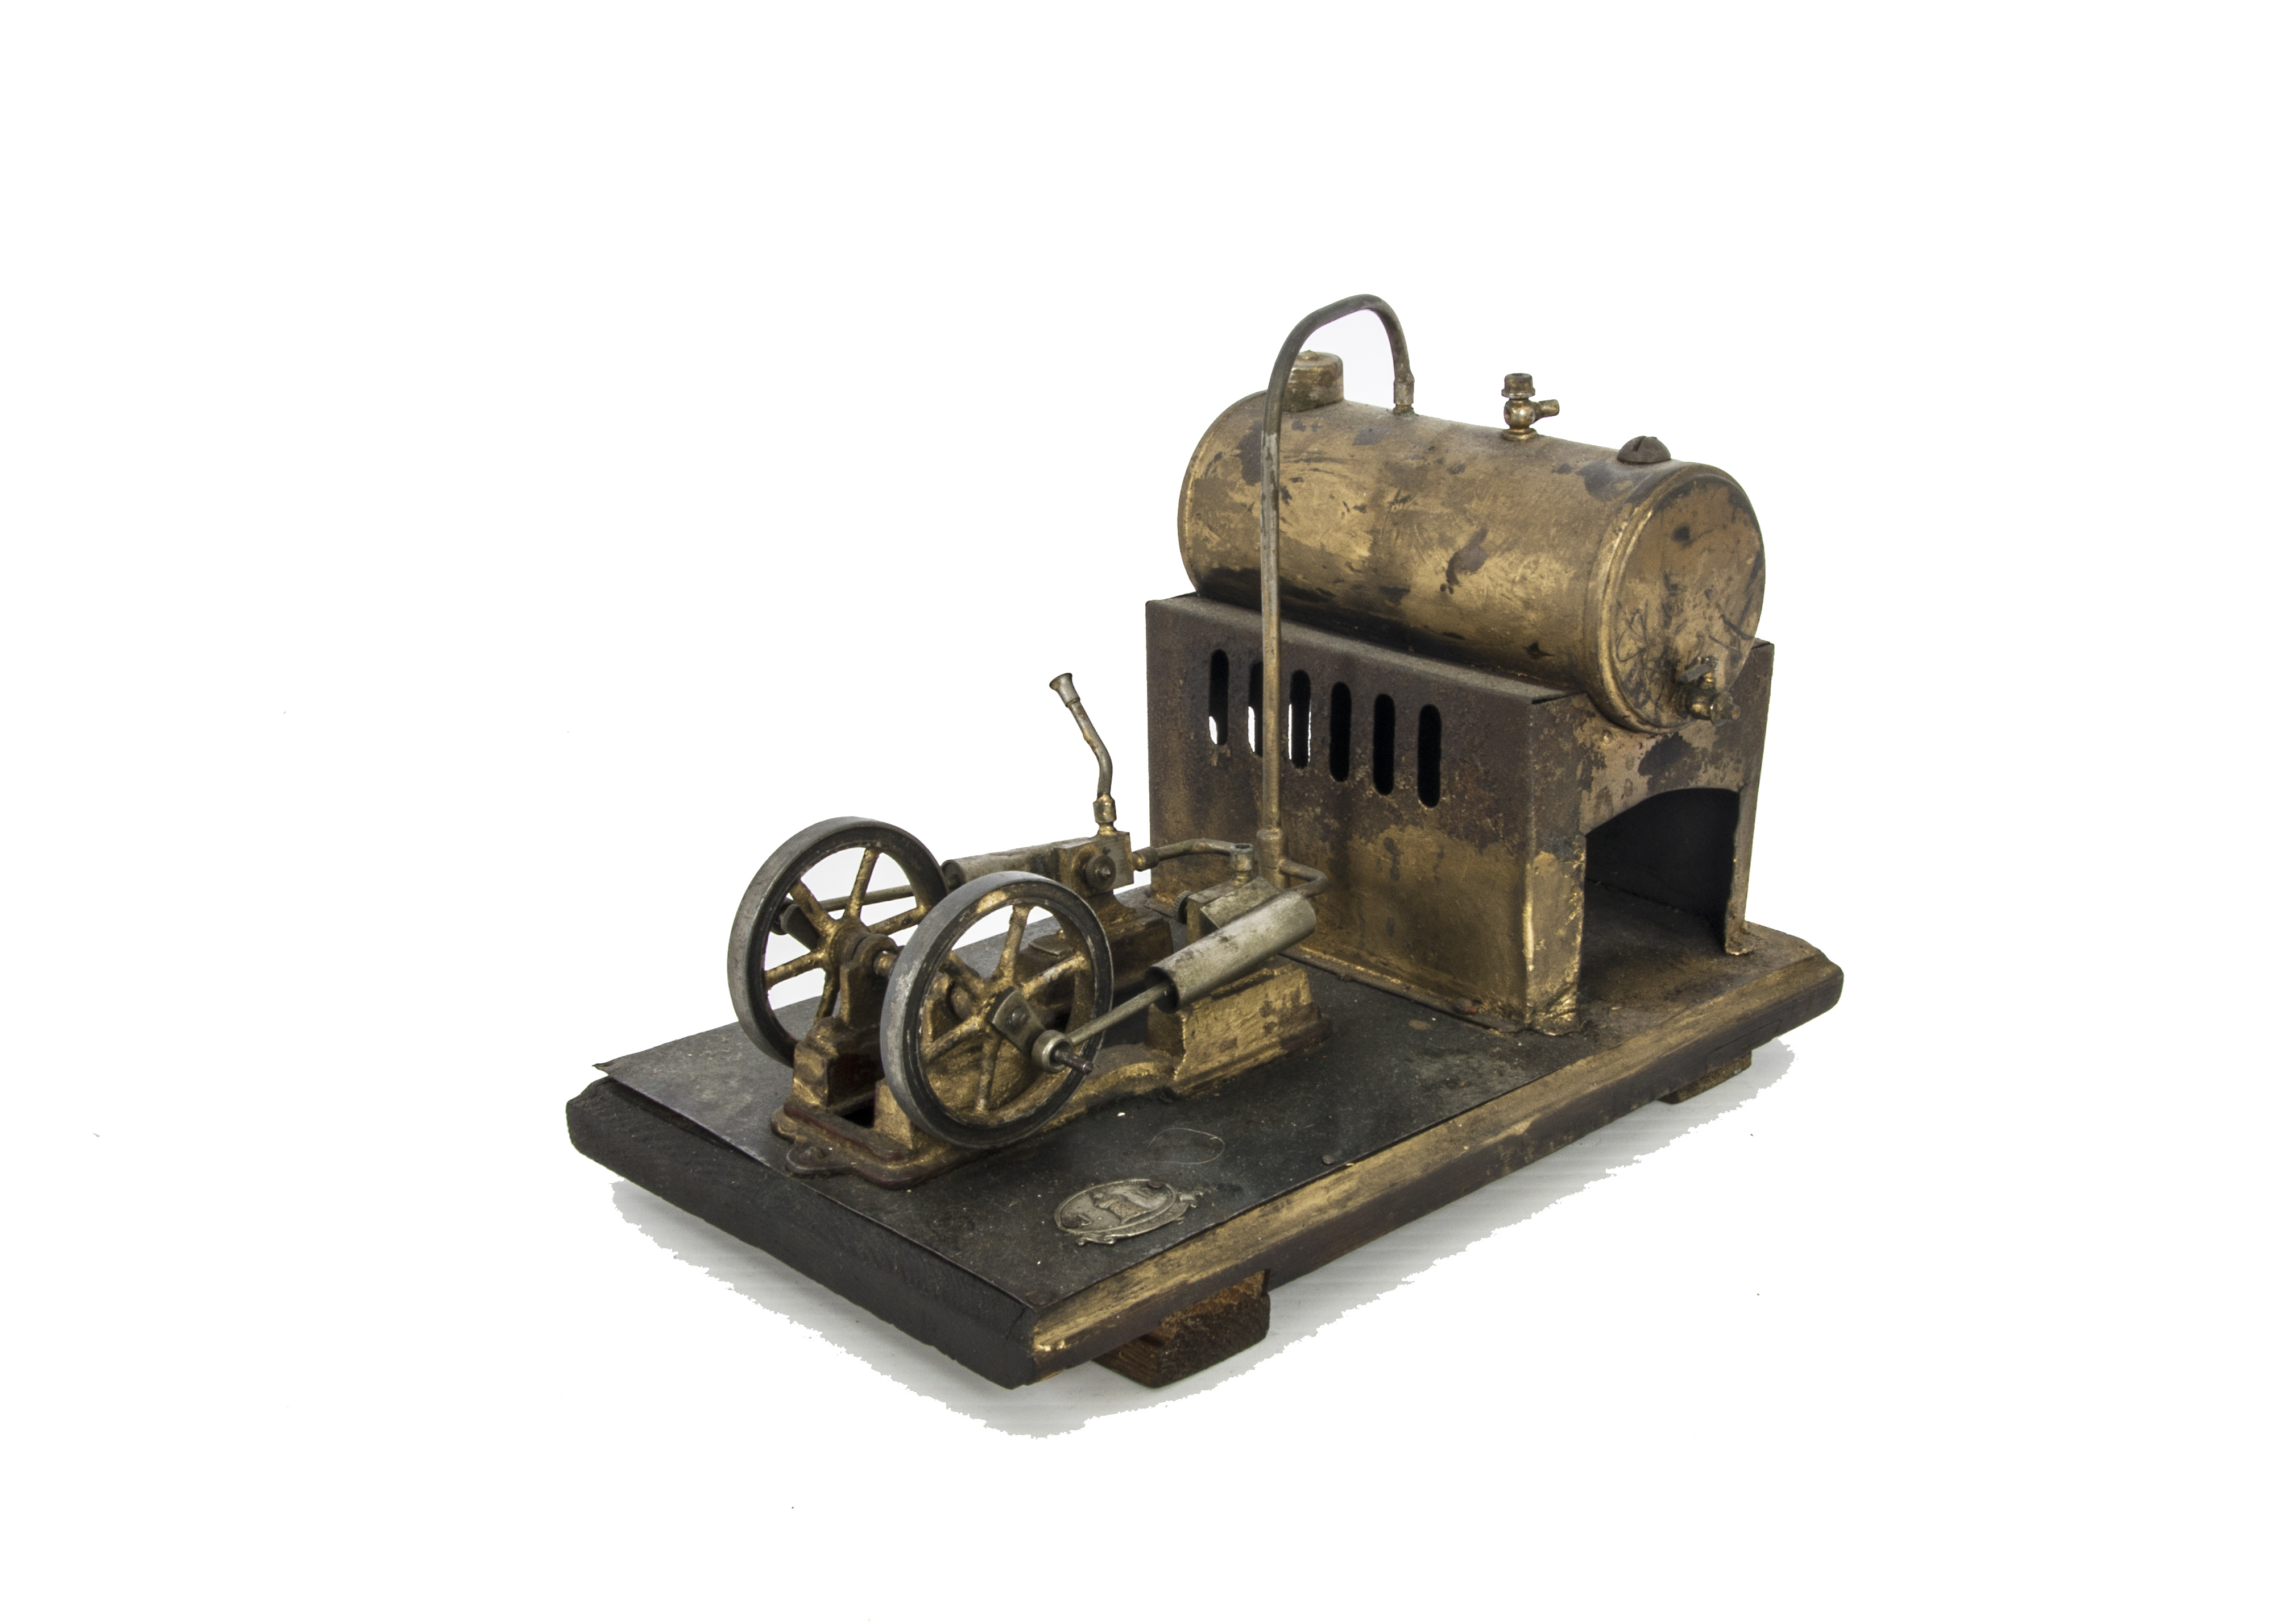 A Twin-Cylinder Horizontal Stationary Steam Engine by Falk, with cast engine bed supporting the